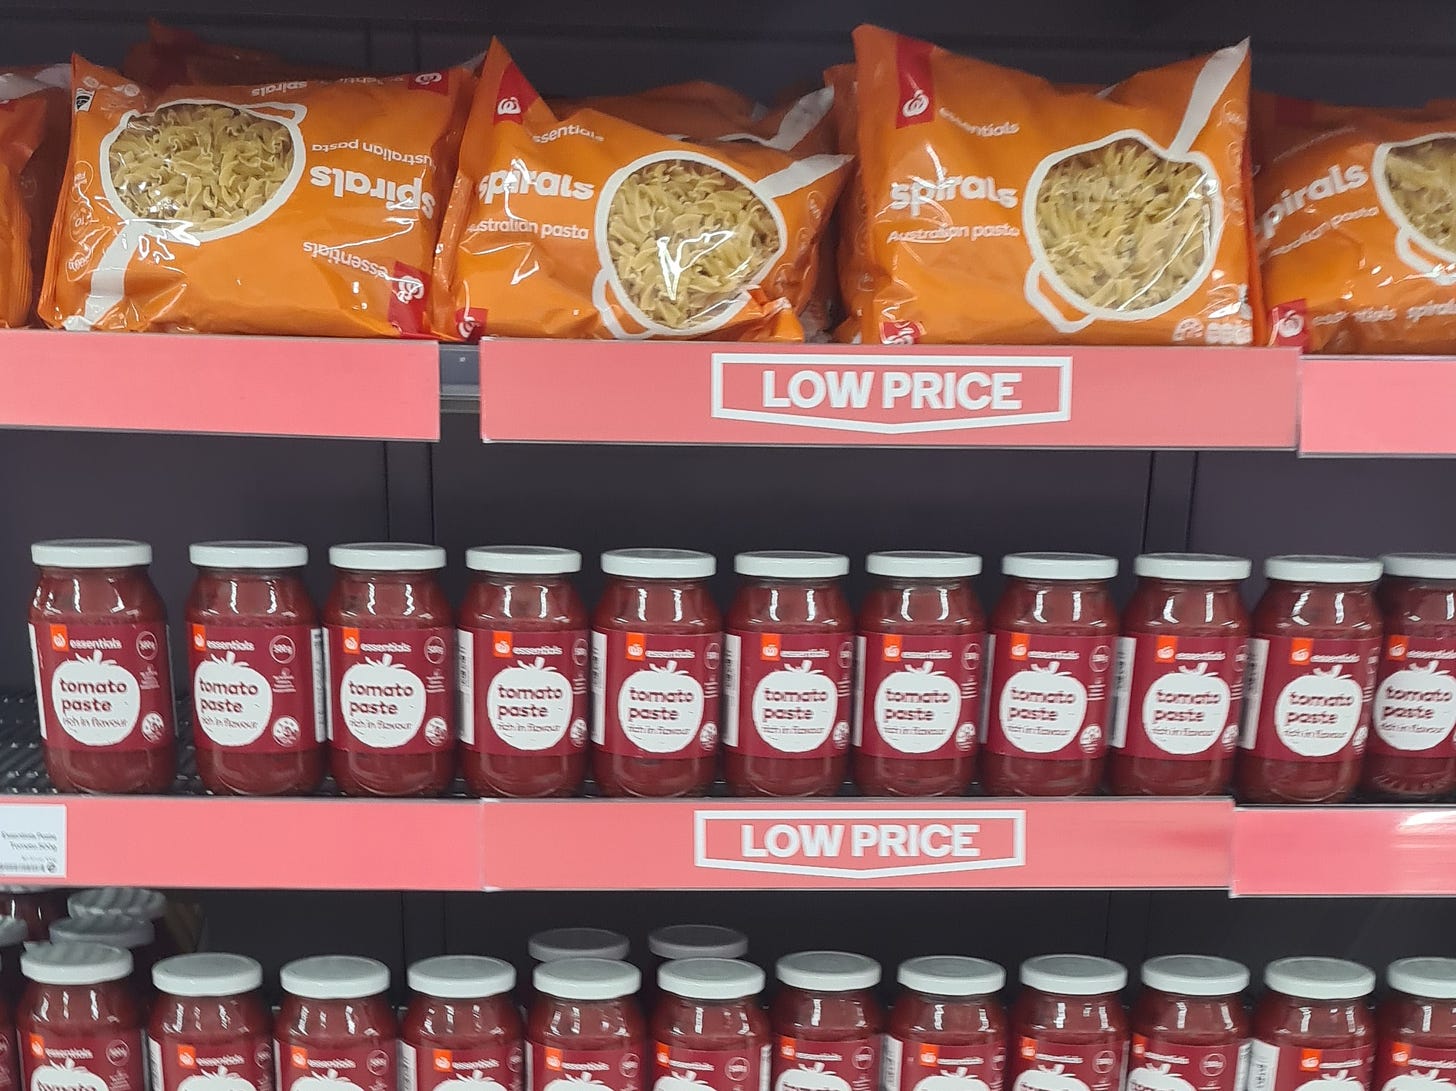 Quick pic I took at the local supermarket of their end of aisle specials. It has shelves of cheap pasta and rows of cheap tomato paste with signs saying ‘low price’.